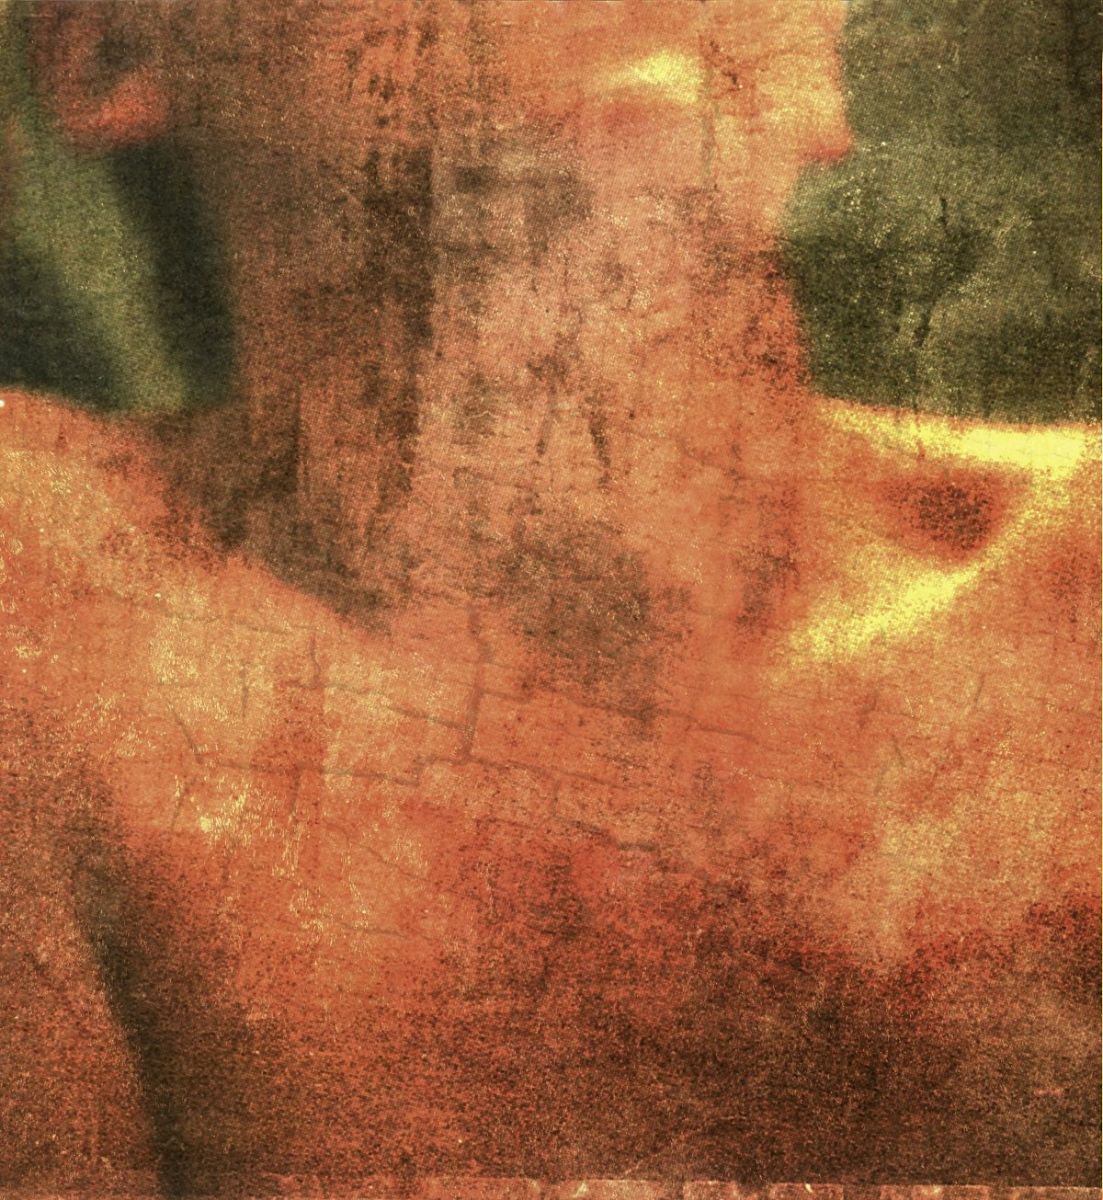 COU by Philippe berthier